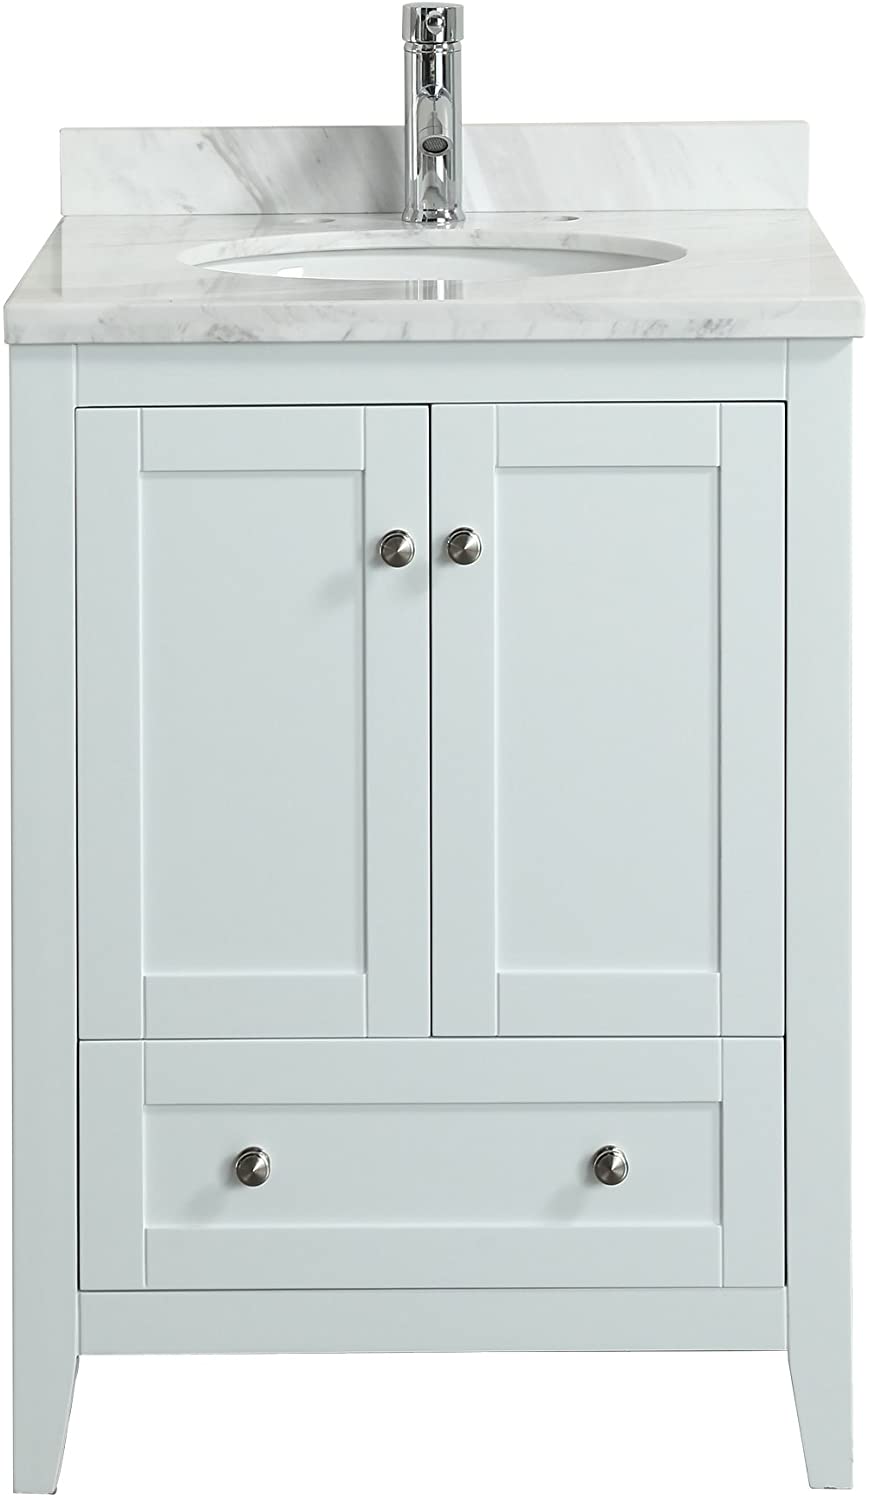 Eviva Lime 24 Inch Bathroom Vanity with White Marble Carrera Top Bathroom Vanity Eviva White 